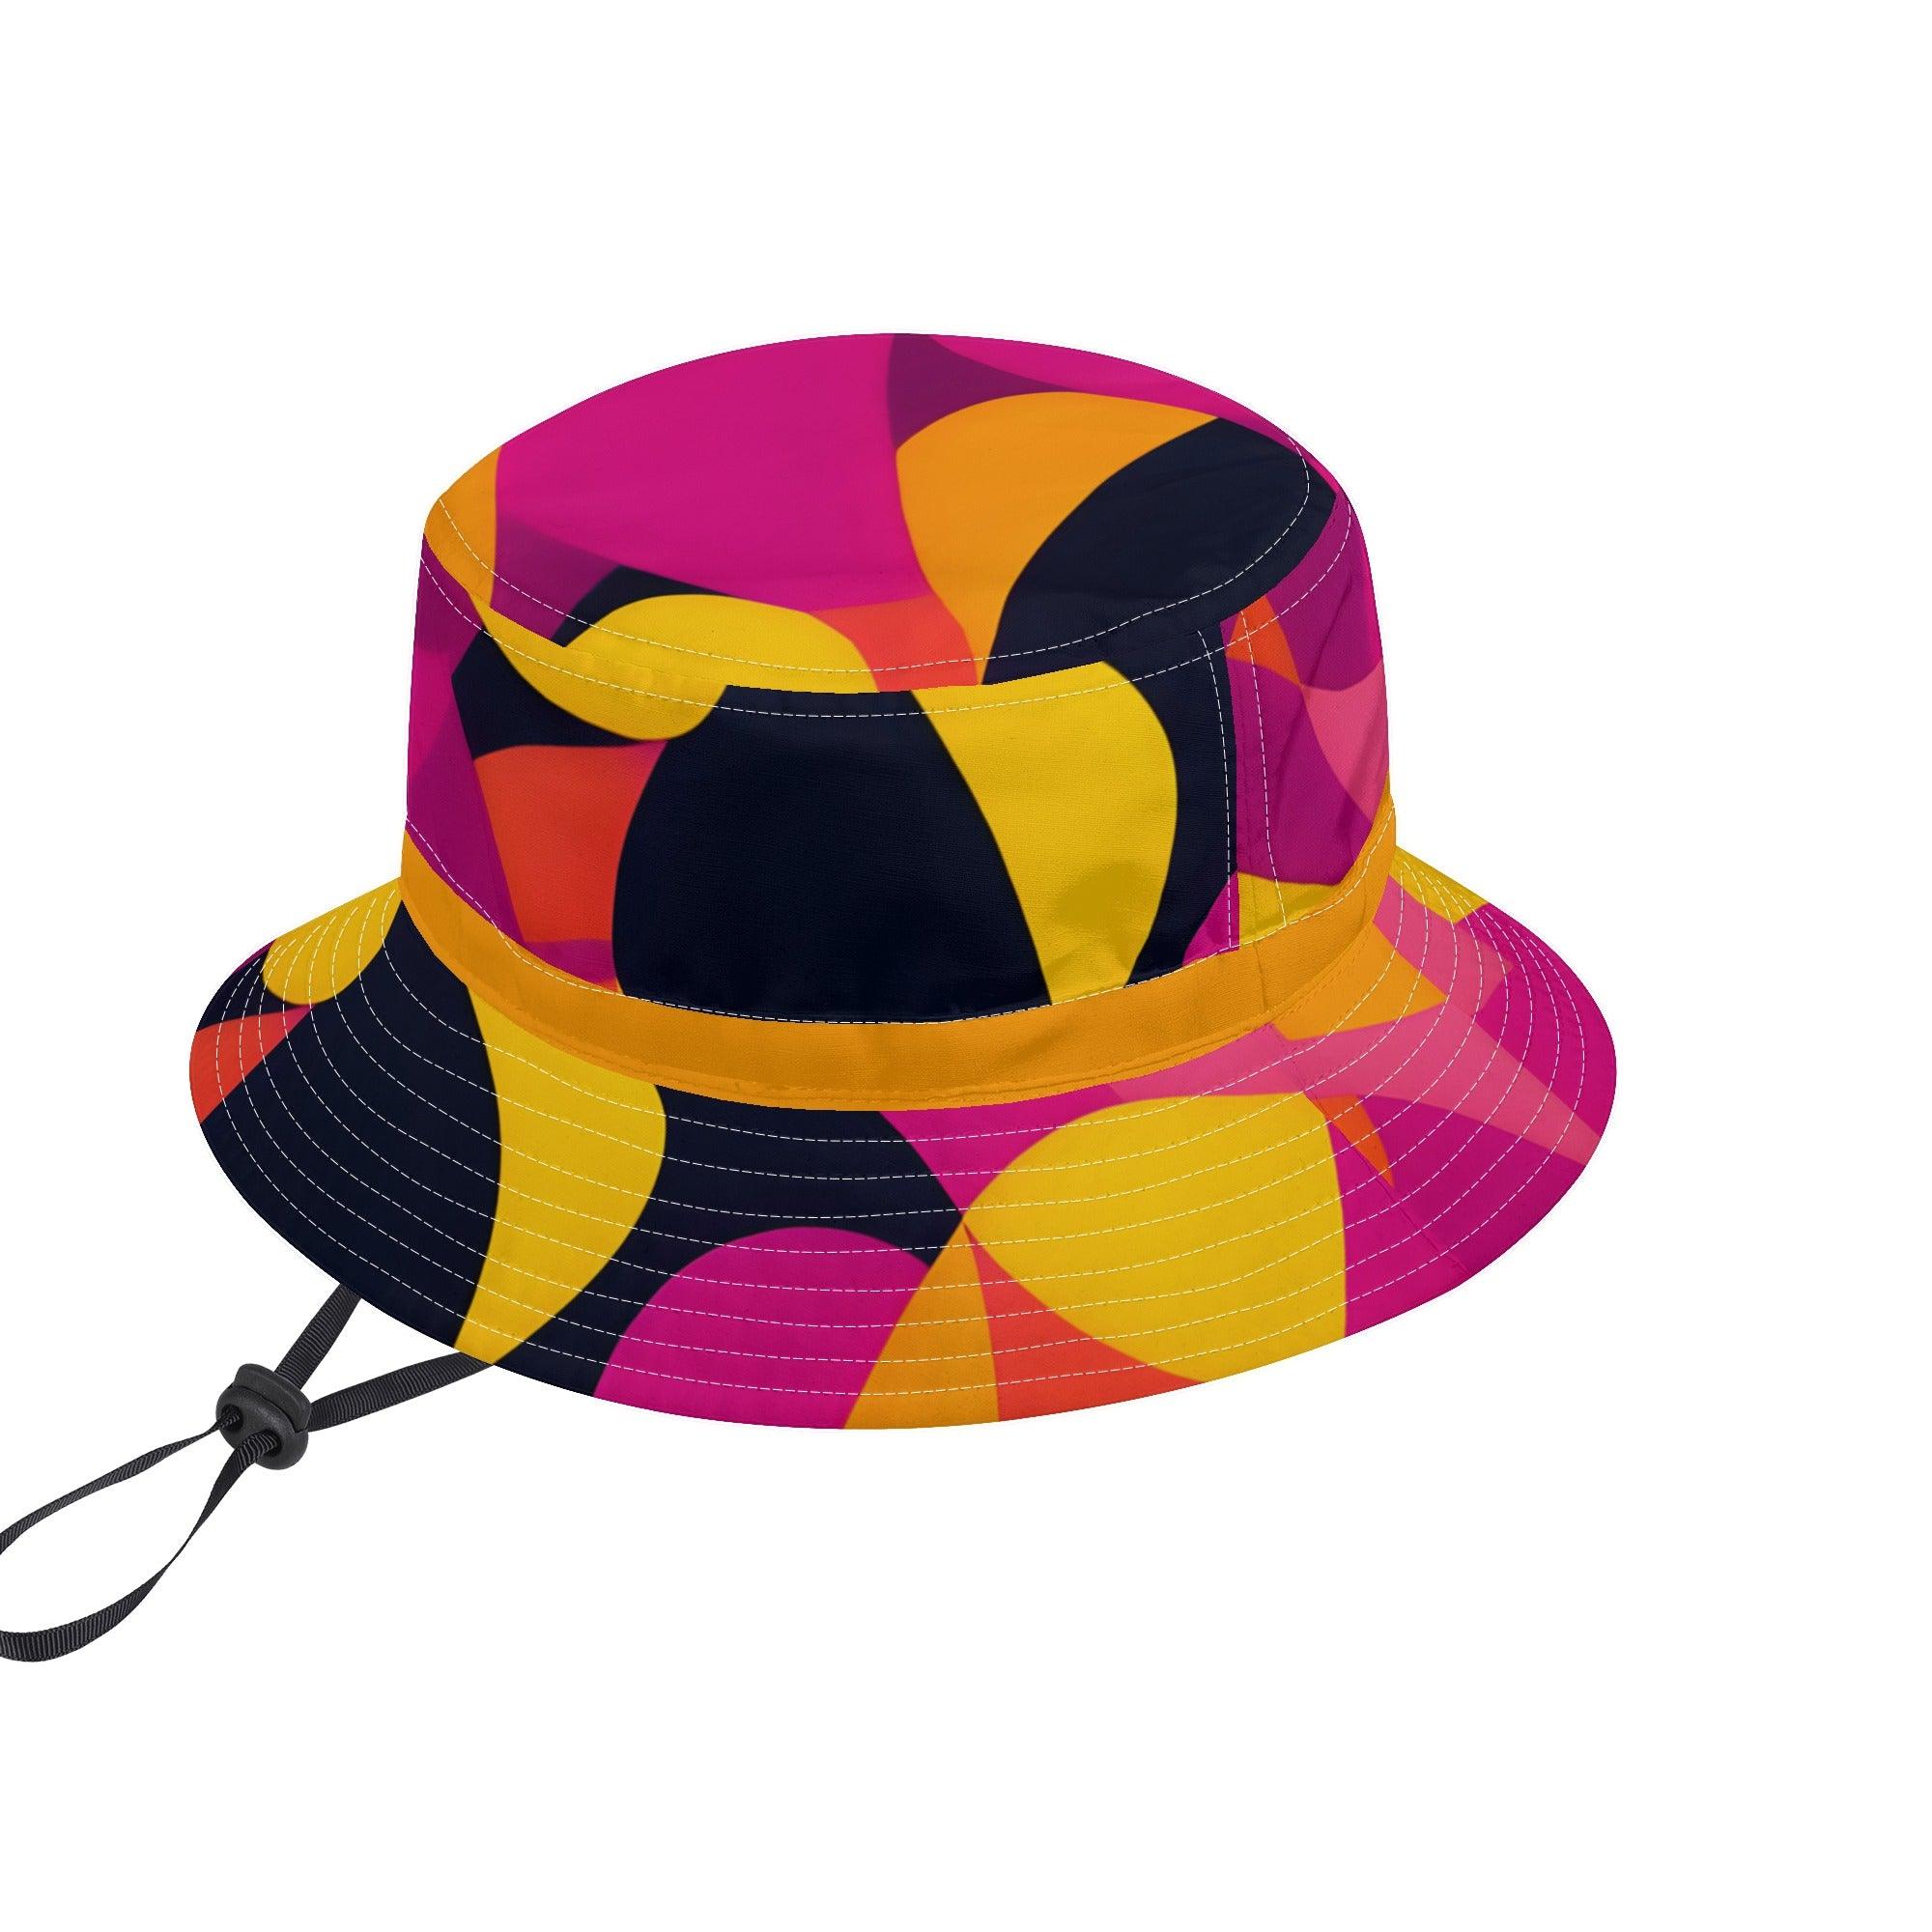 929 Adjustable Bucket Hat - Abstract Geometric - Bold Vibrant Funky Retro Multicolor Artistic Summer Women's Pink Yellow Orange Blissfully Brand